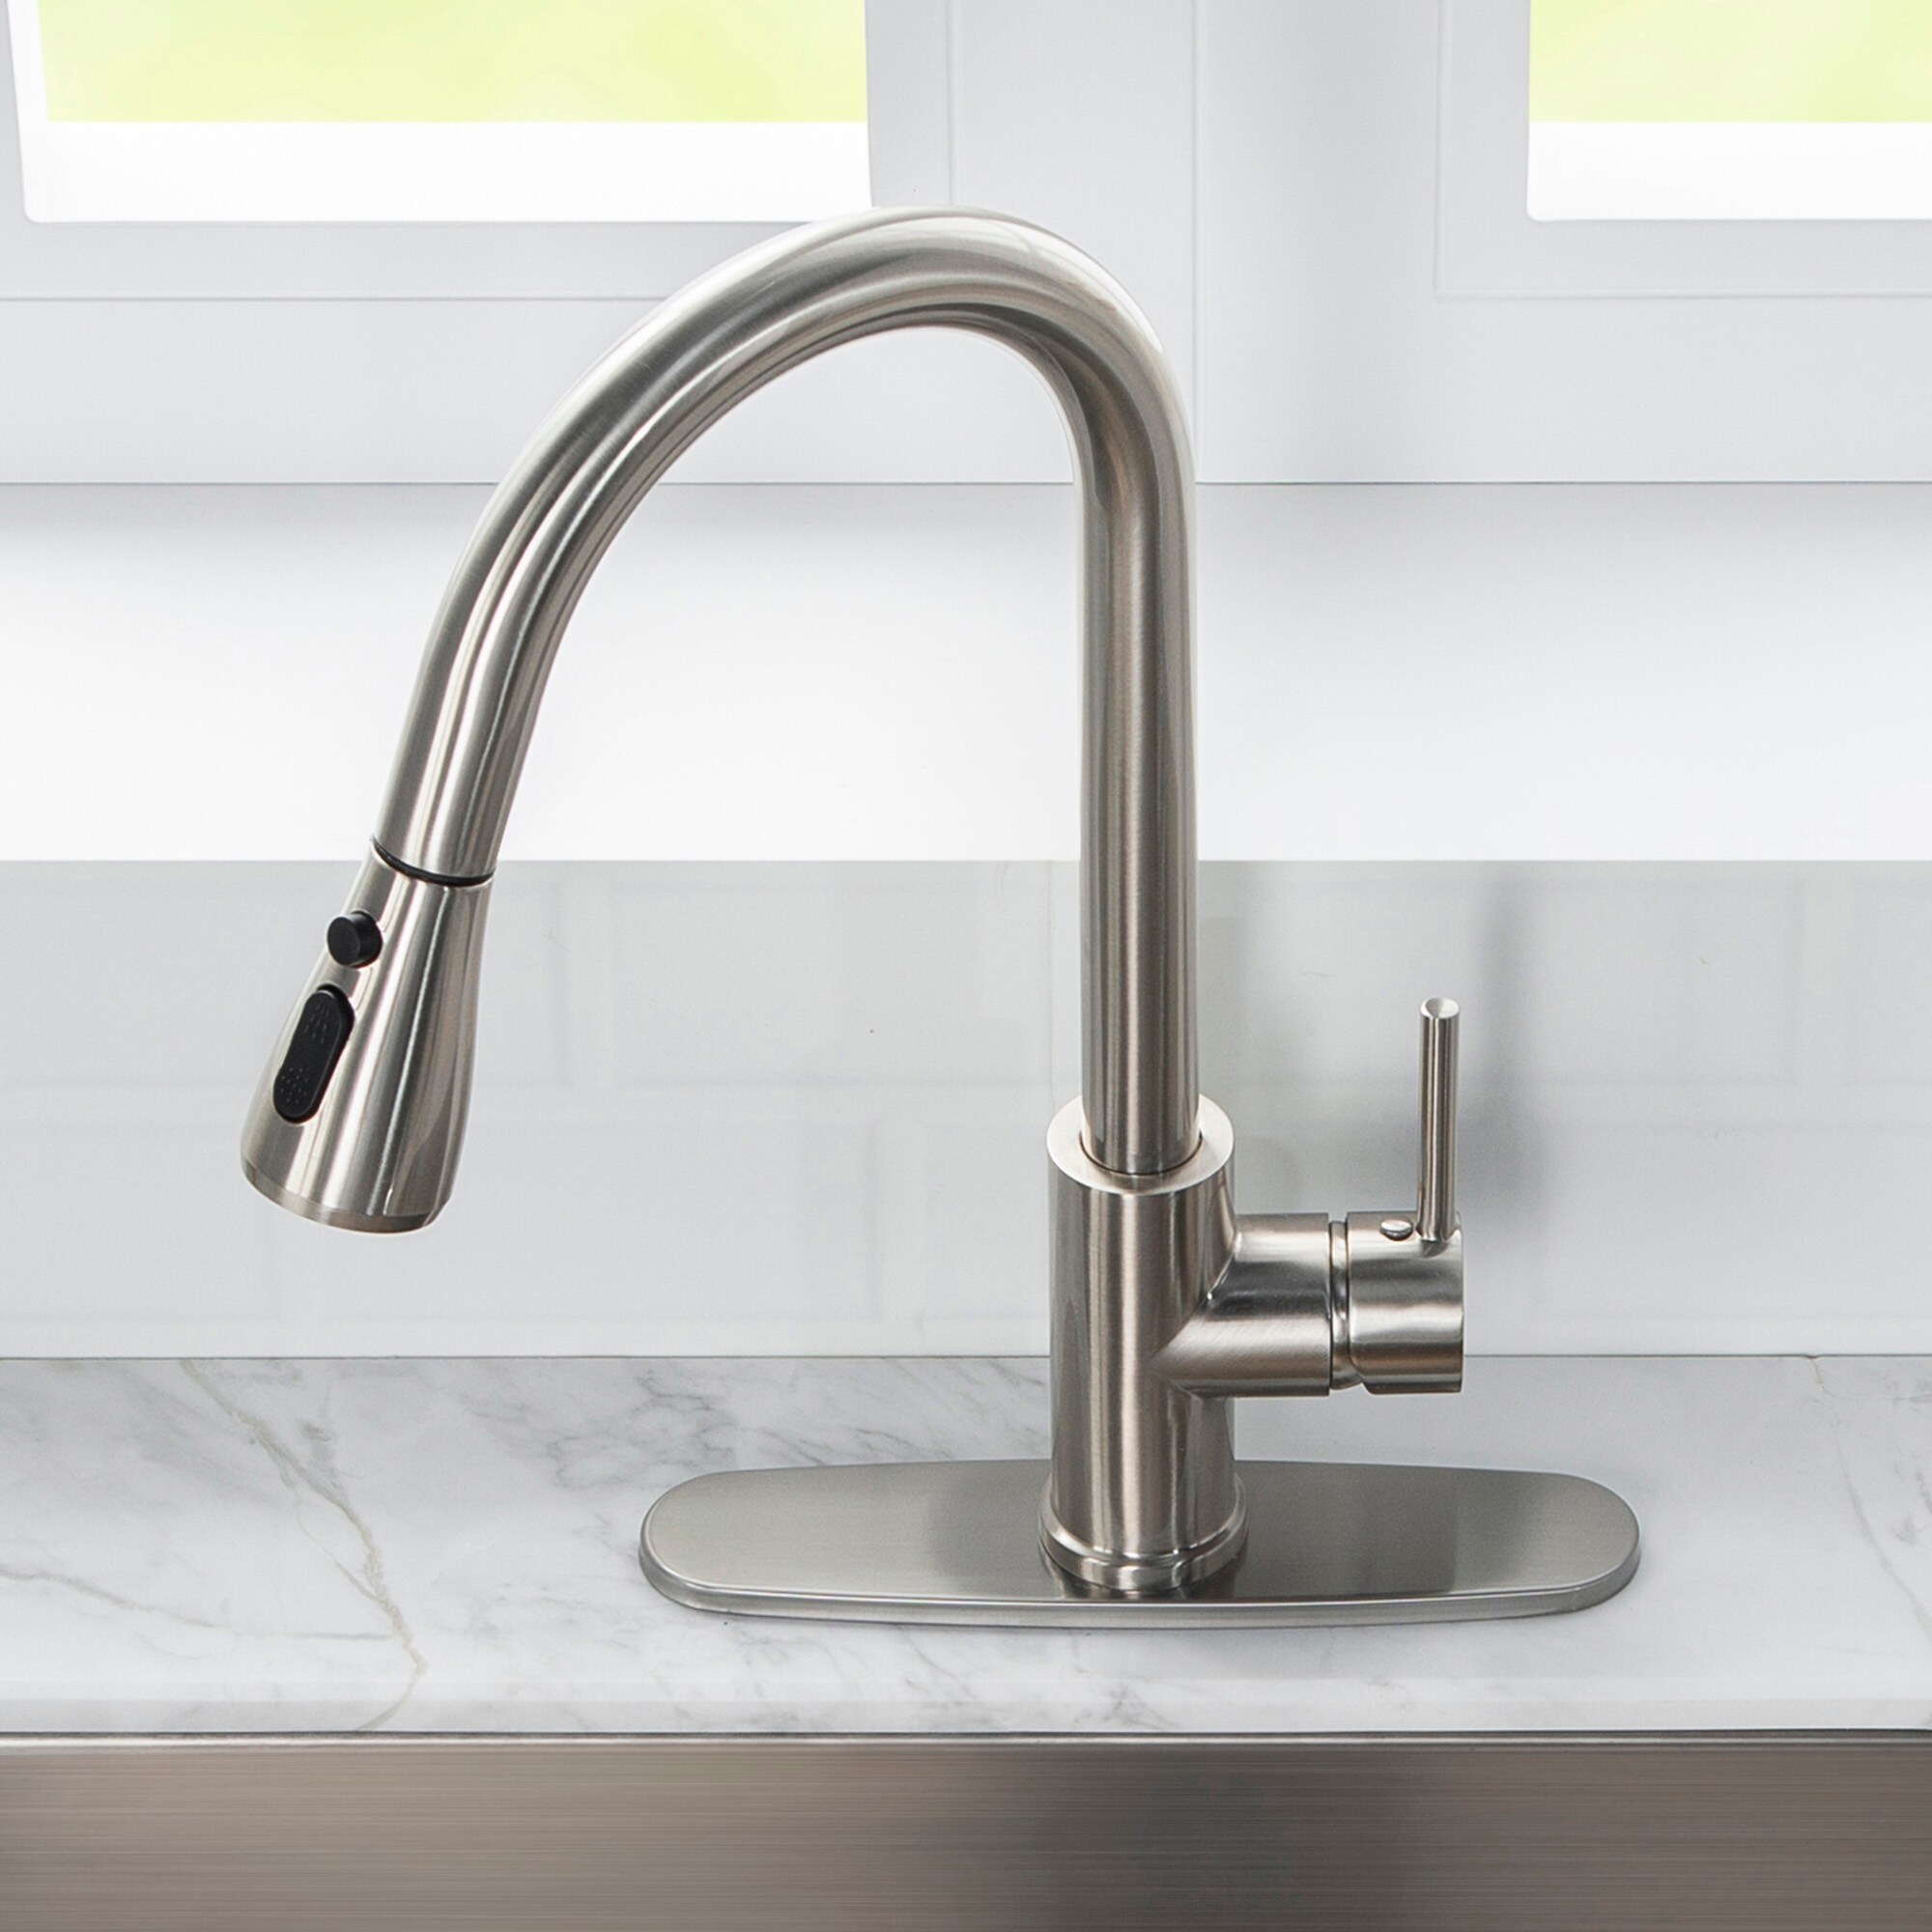 Woodbridge Brushed Nickel Single Handle Pull-out Kitchen Faucet with ...